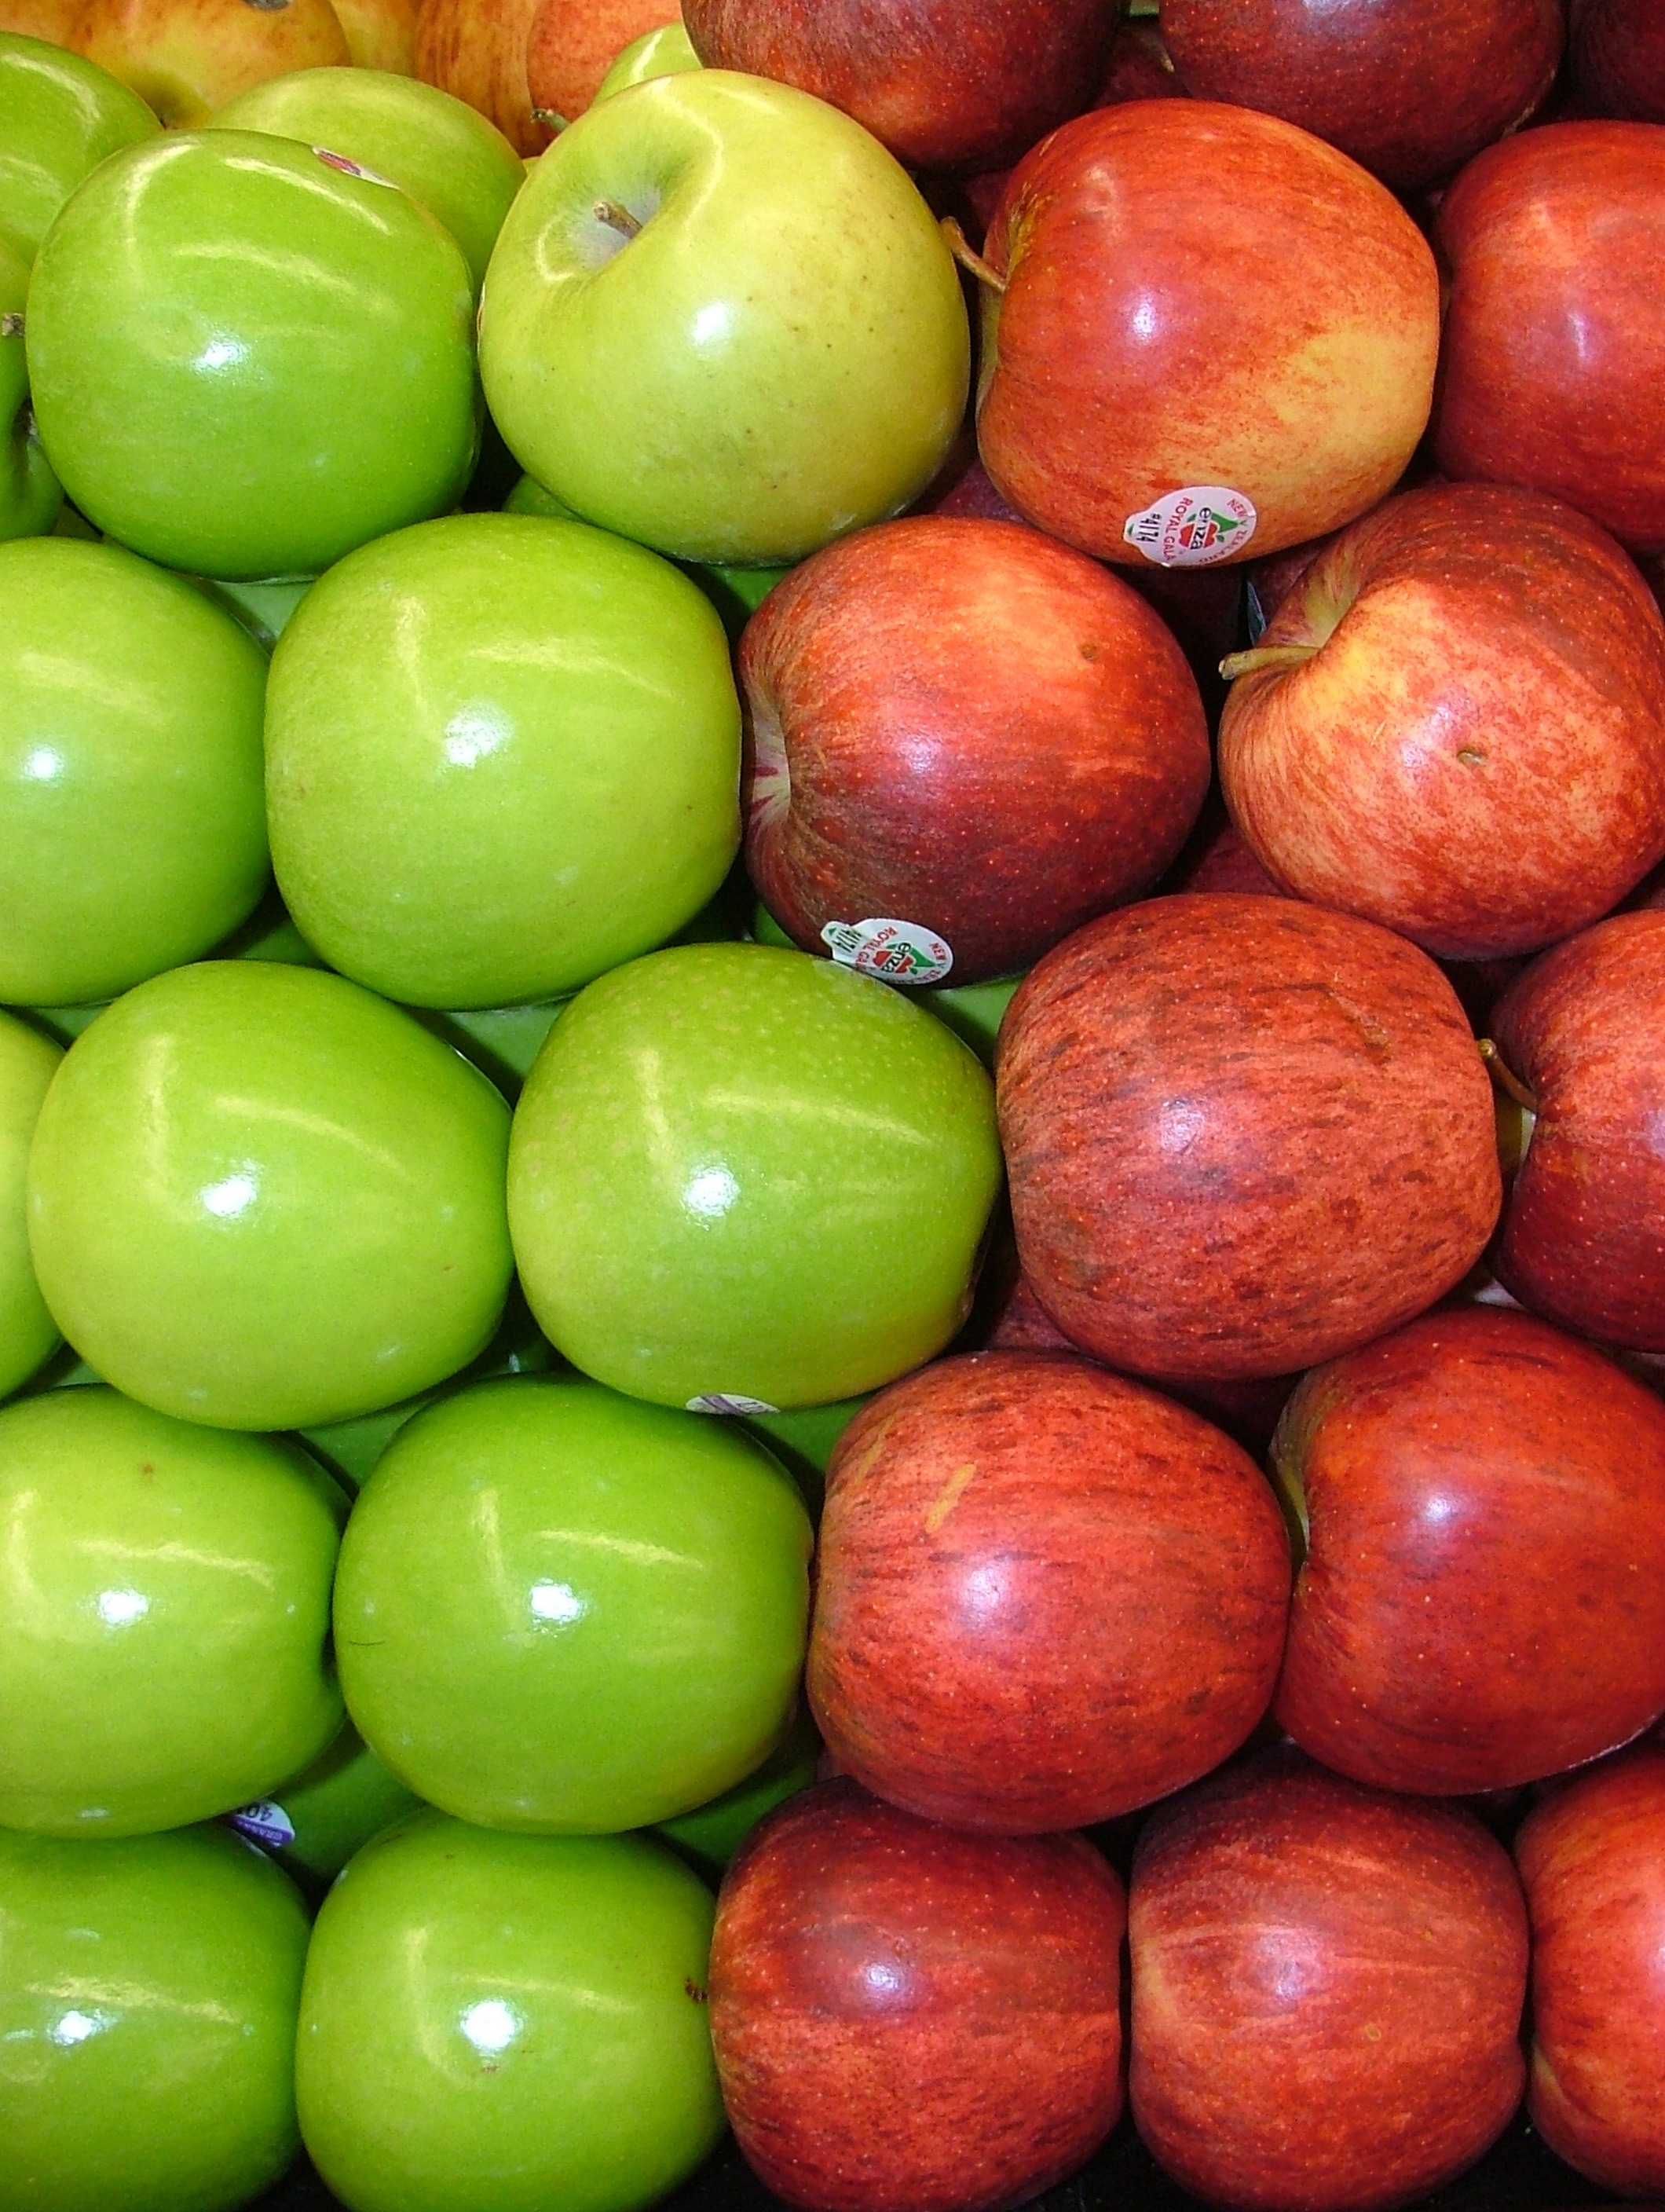 Assorted Red and Green Apples 2120px